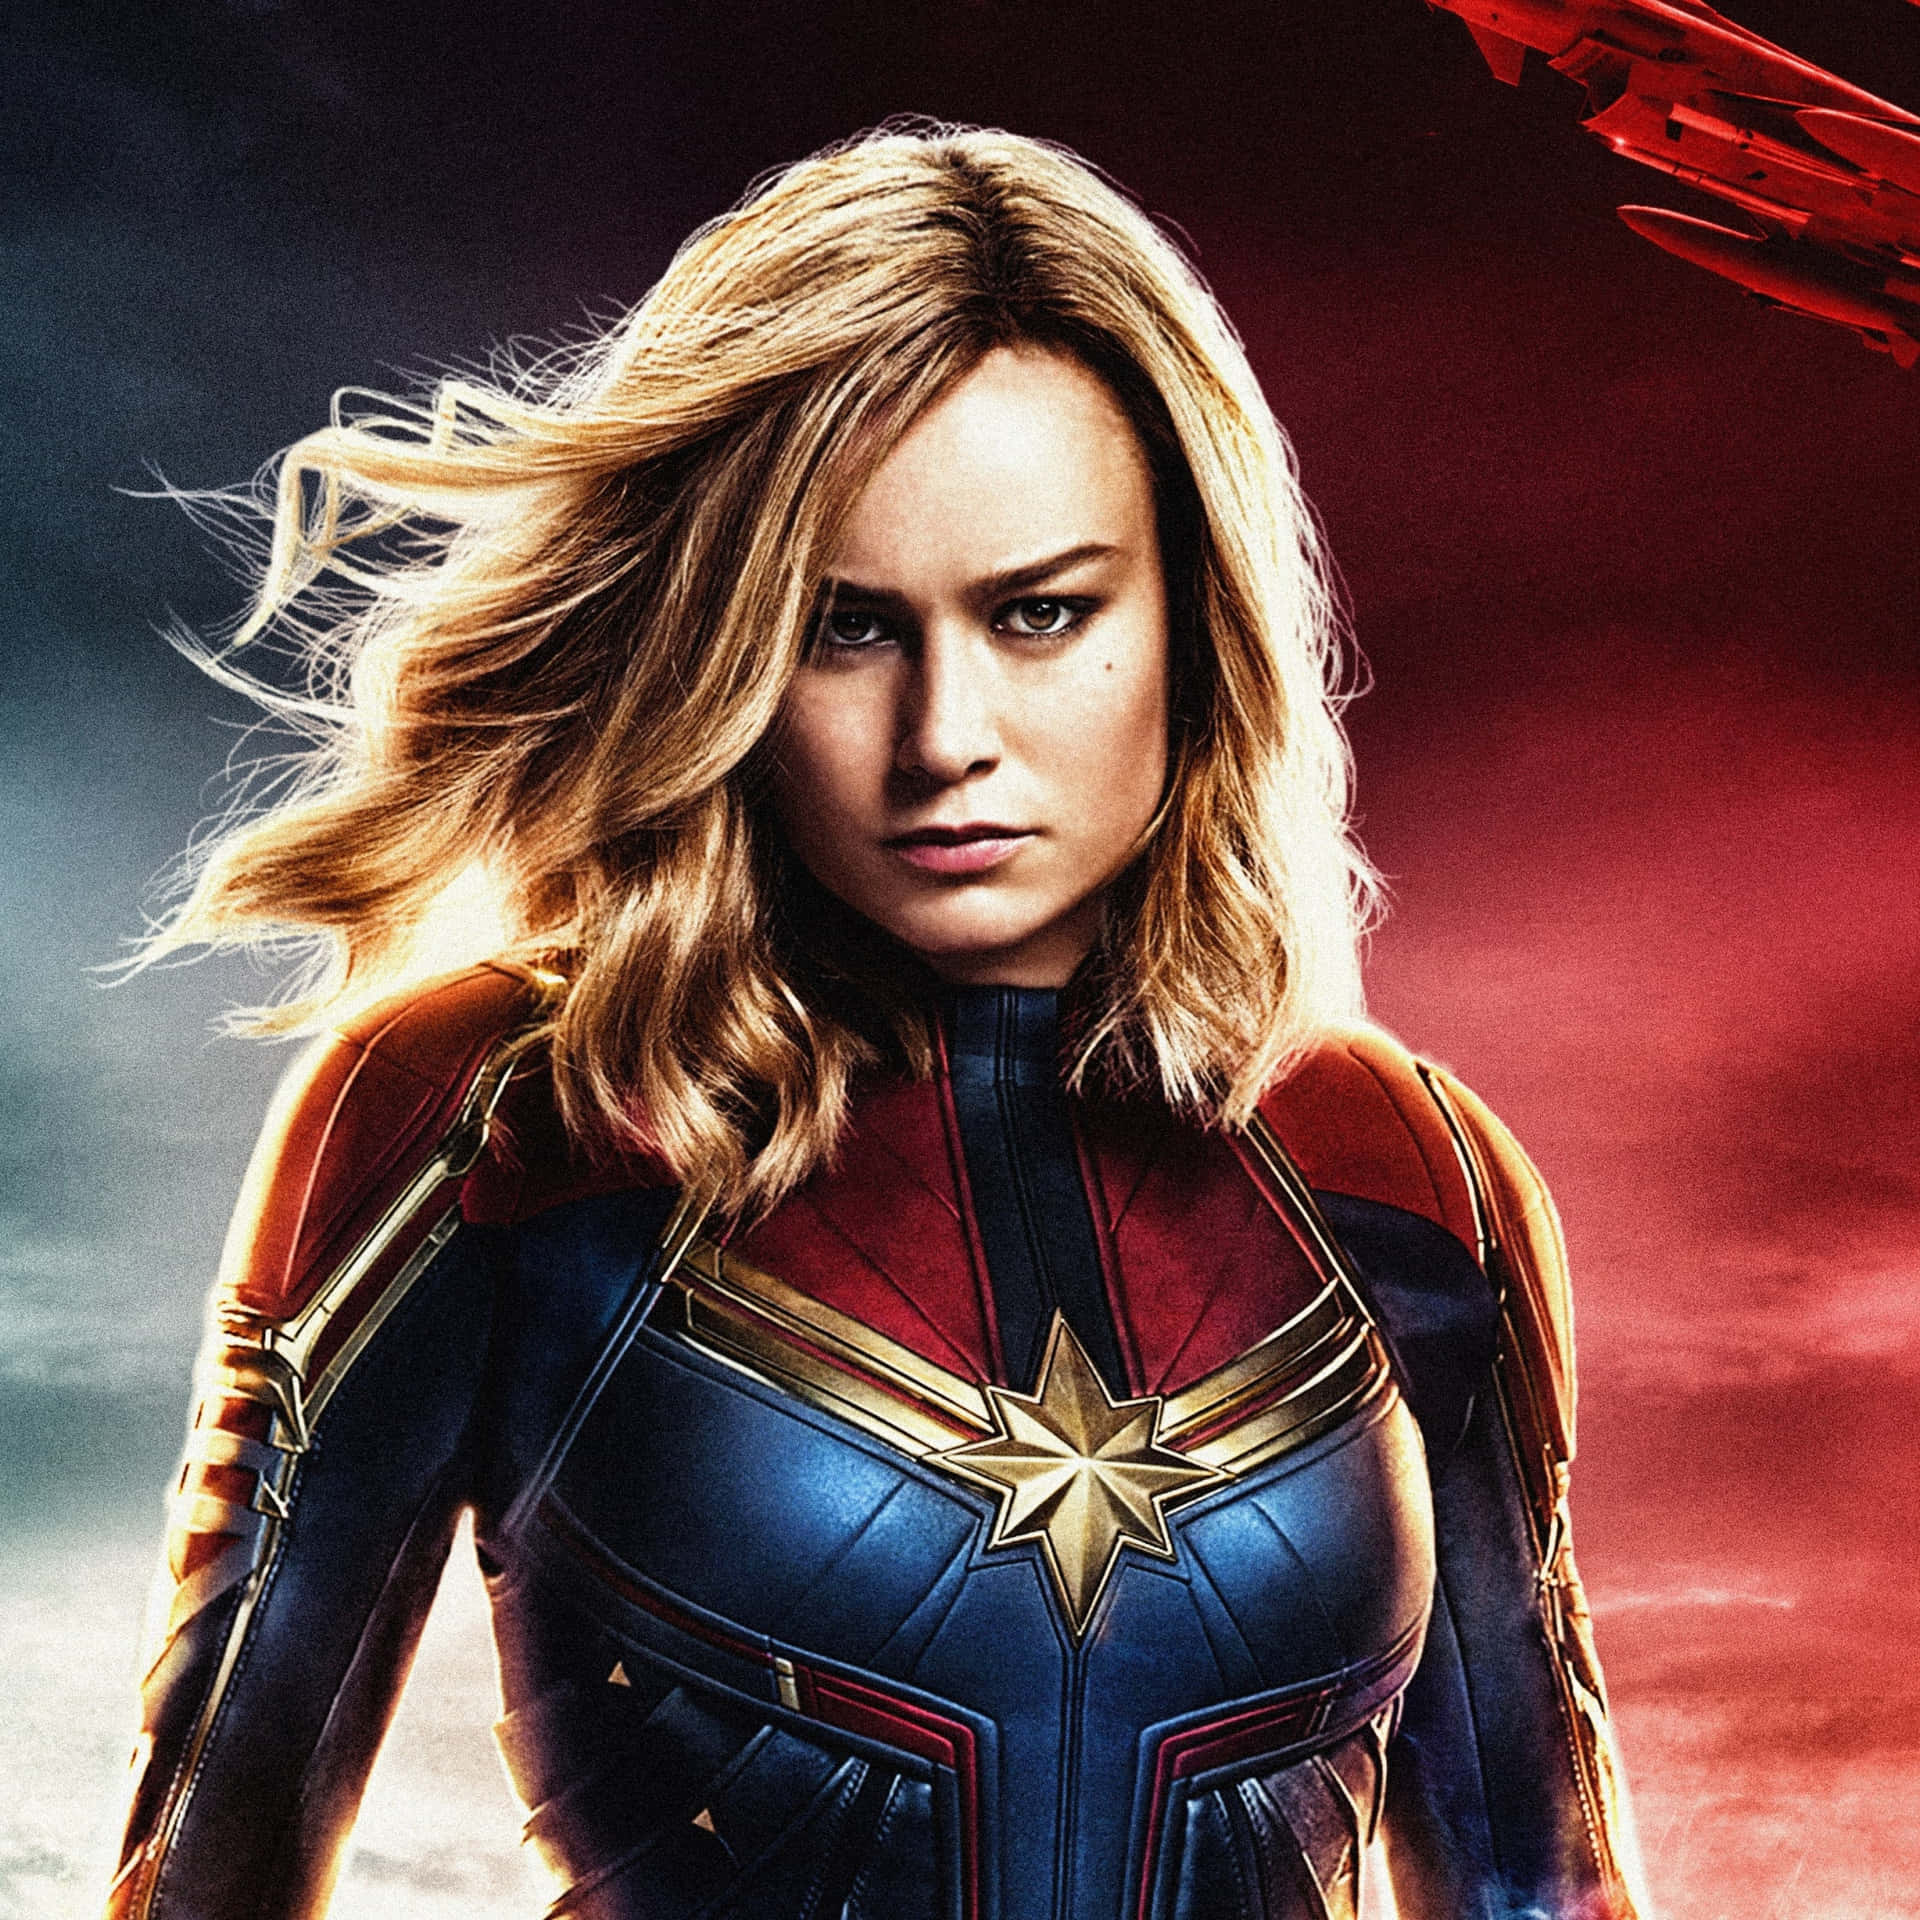 "Unlock your superhero potential with the new Captain Marvel iPad!" Wallpaper